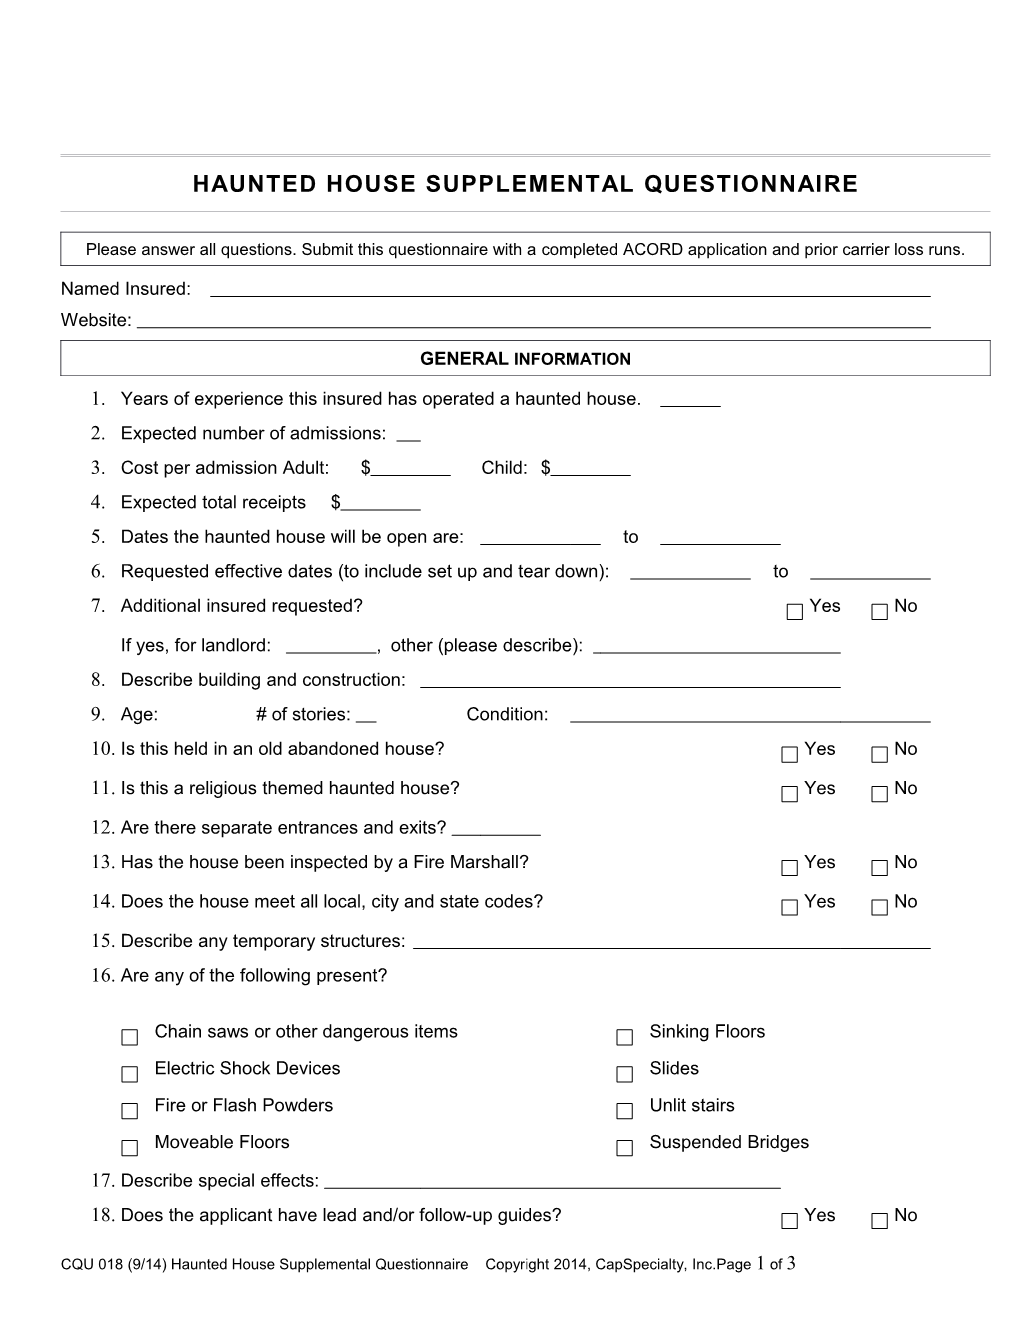 Haunted House Supplemental Questionnaire